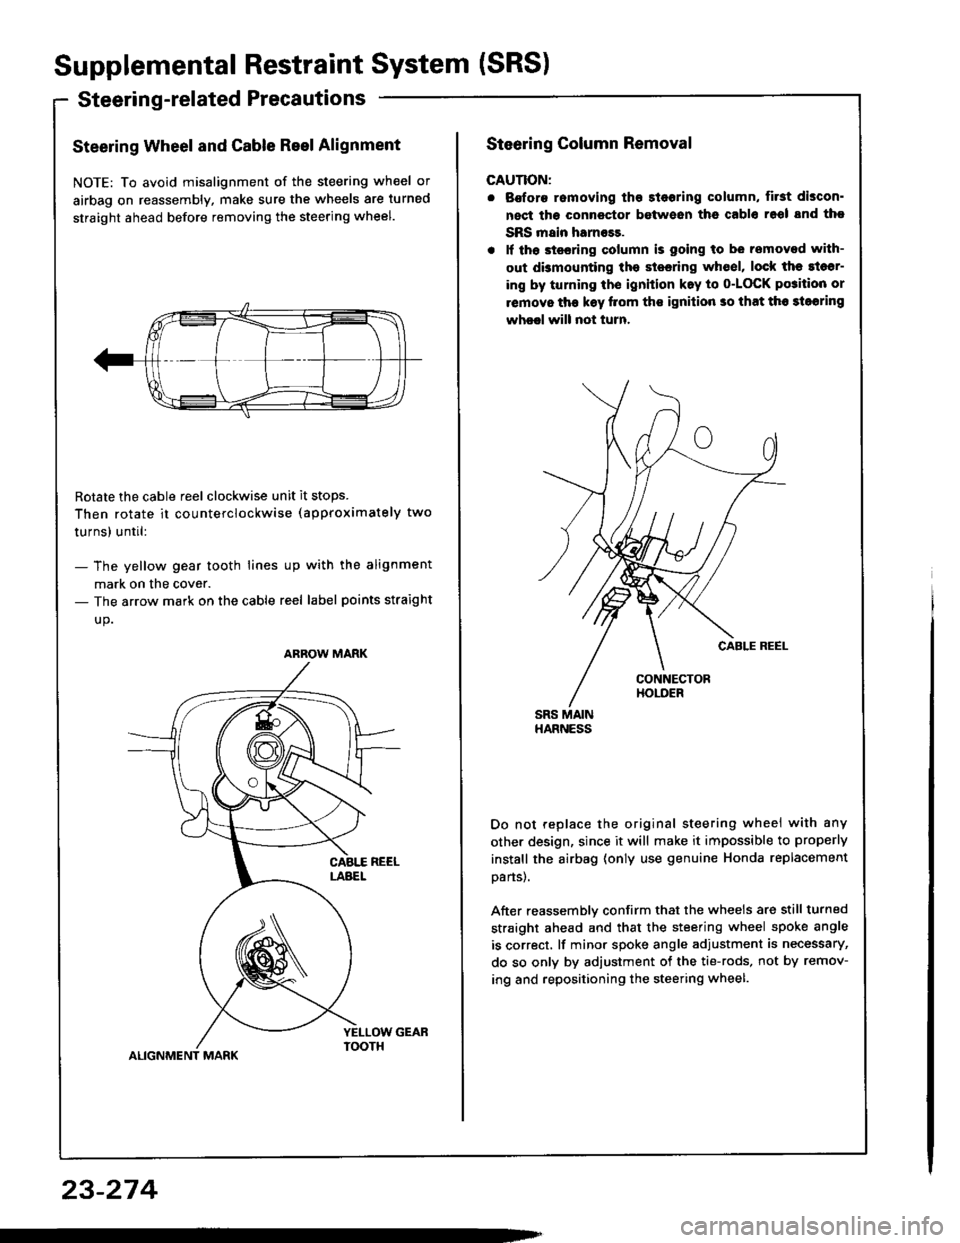 HONDA INTEGRA 1994 4.G Service Manual Supplemental Restraint System (SRS)
Steerin g-related Precautions
Steering Wheel and Cable Reel Alignment
NOTE: To avoid misalignment of the steering wheel or
airbag on reassembly, make sure the wheel